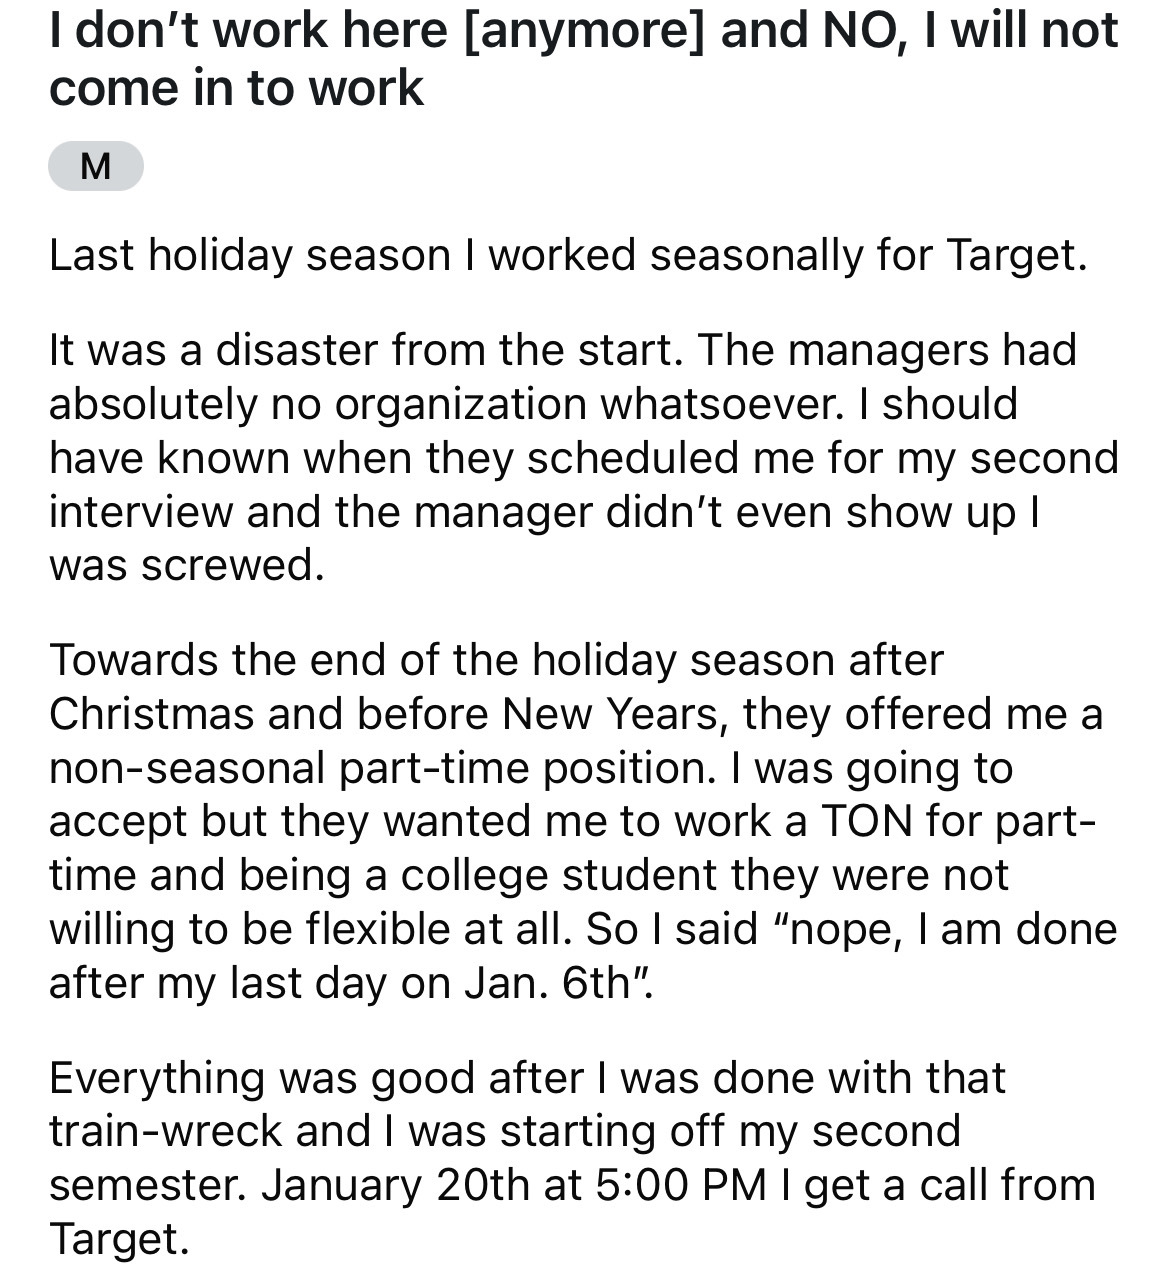 document - I don't work here anymore and No, I will not come in to work M Last holiday season I worked seasonally for Target. It was a disaster from the start. The managers had absolutely no organization whatsoever. I should have known when they scheduled